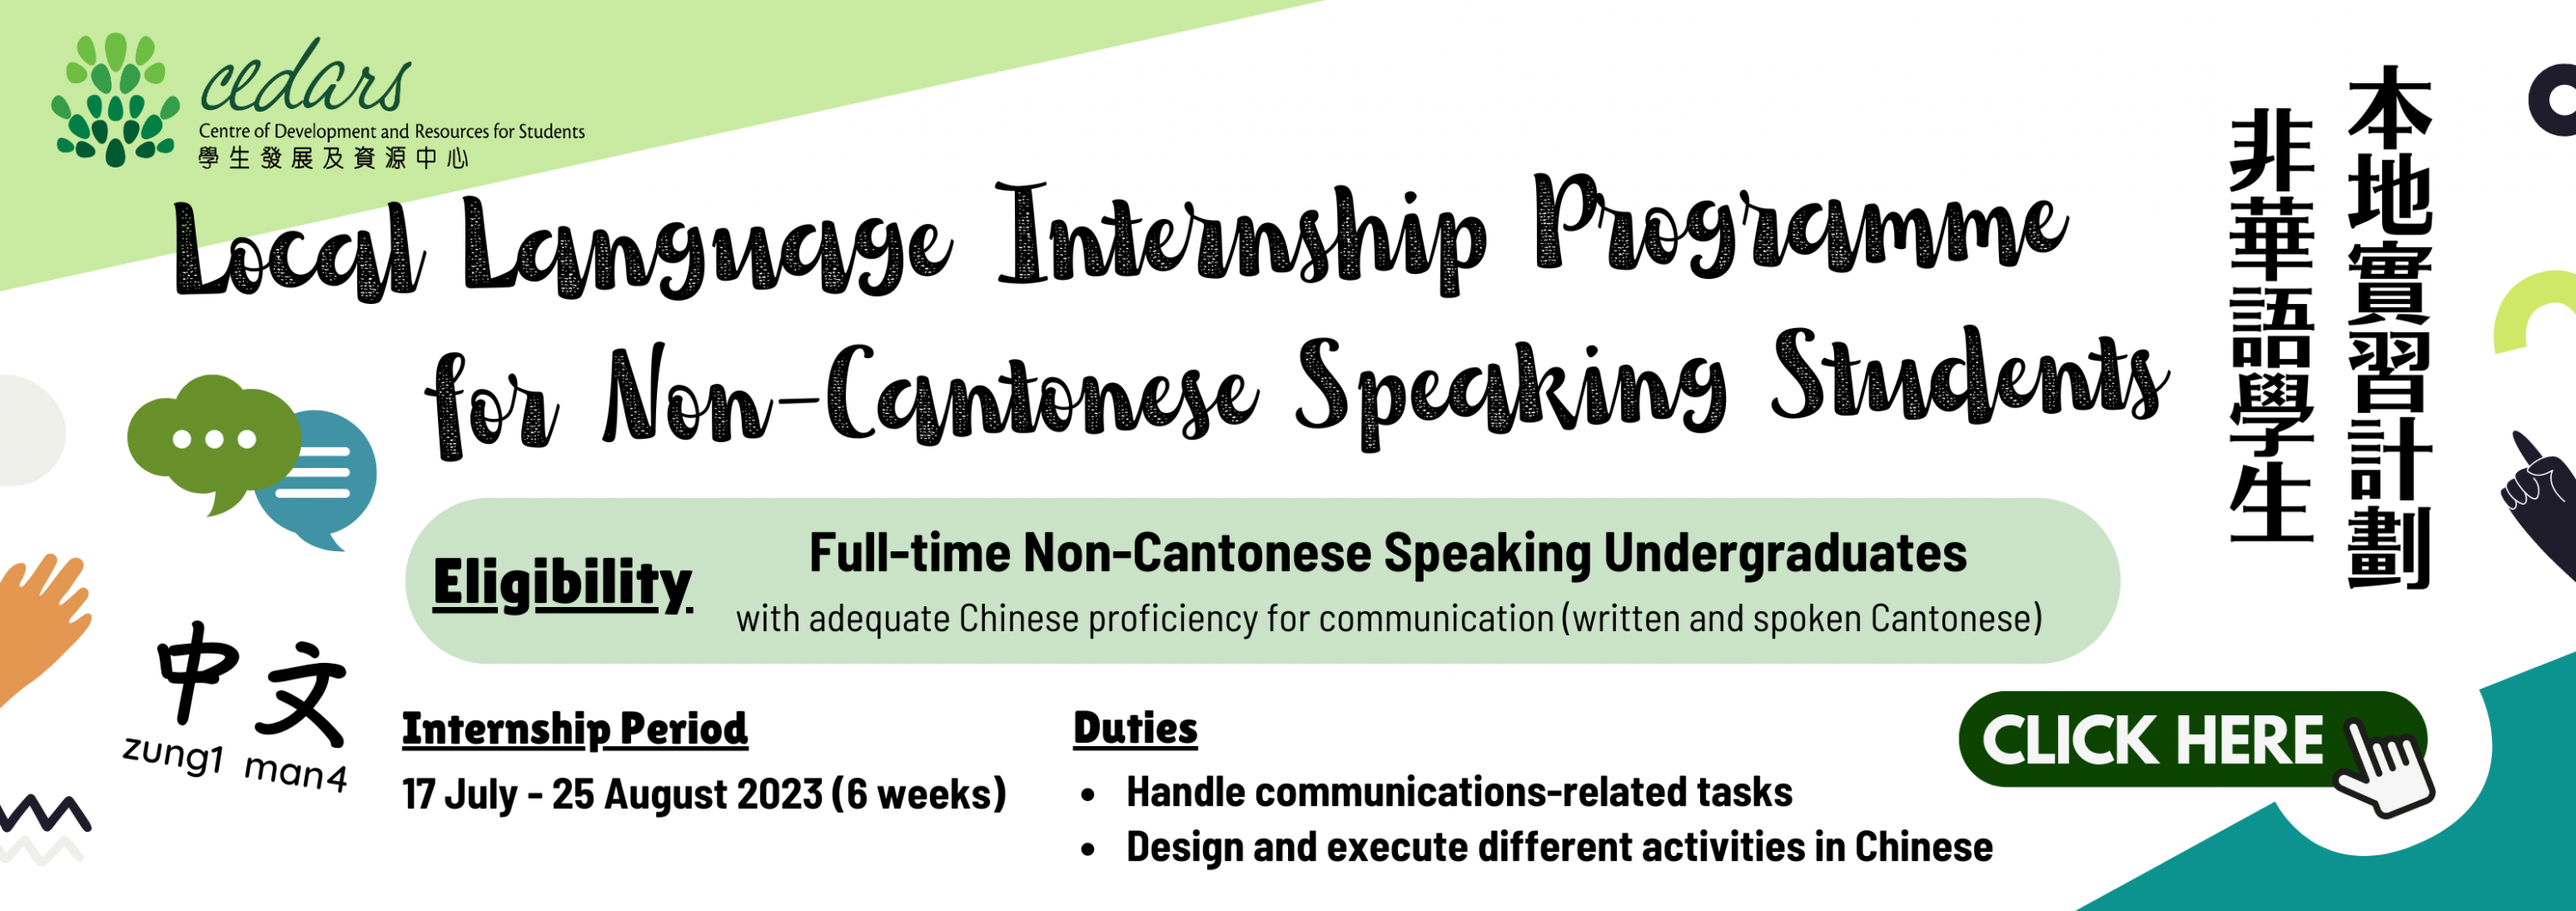 Local Language Internship Programme for Non-Cantonese Speaking Students